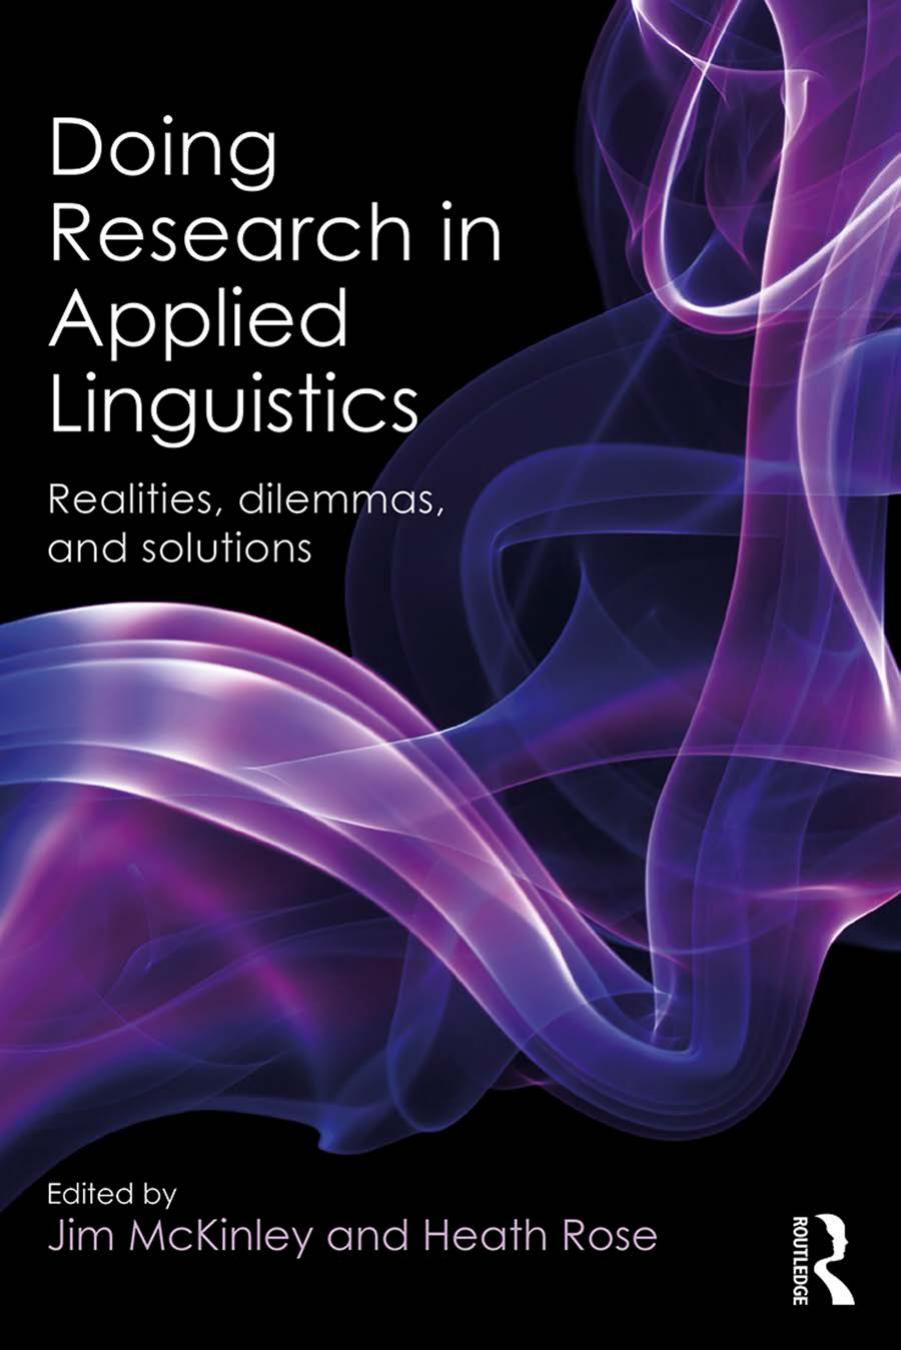 Doing Research in Applied Linguistics: Realities, Dilemmas and Solutions